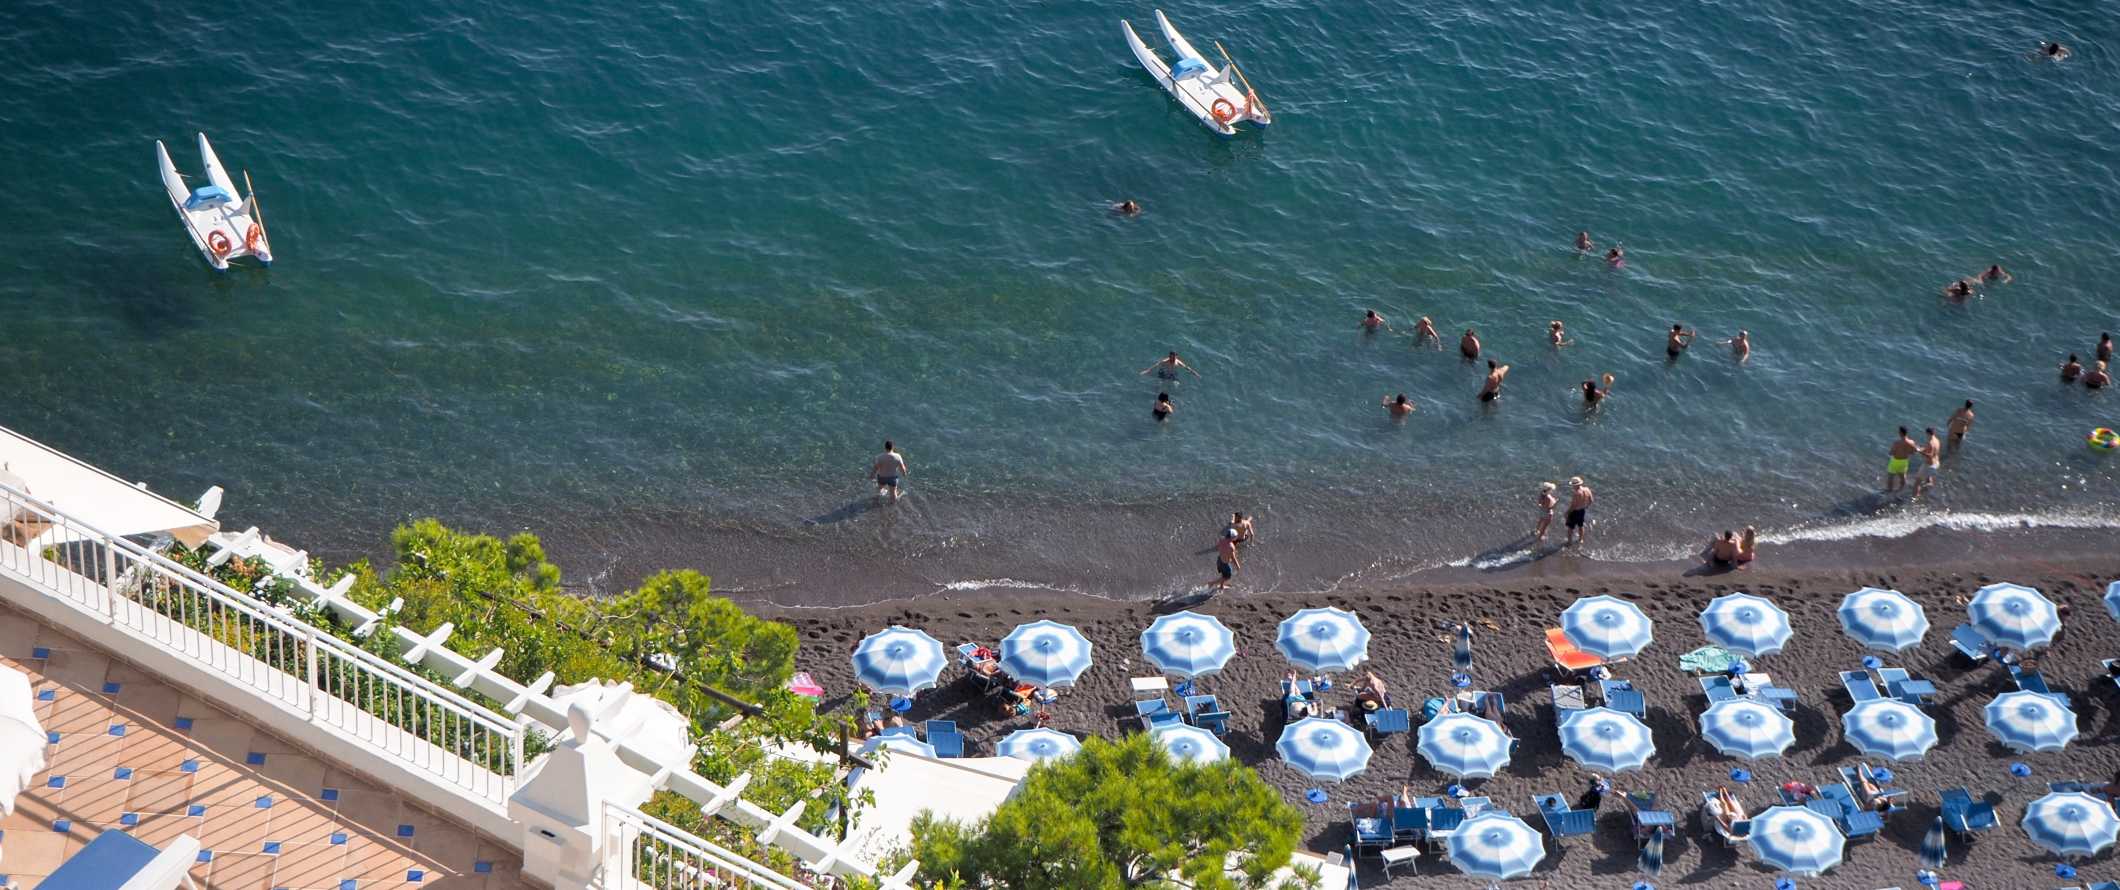 Aerial views of umbrellas and beach chairs on the beach in Sorrento, Italy.